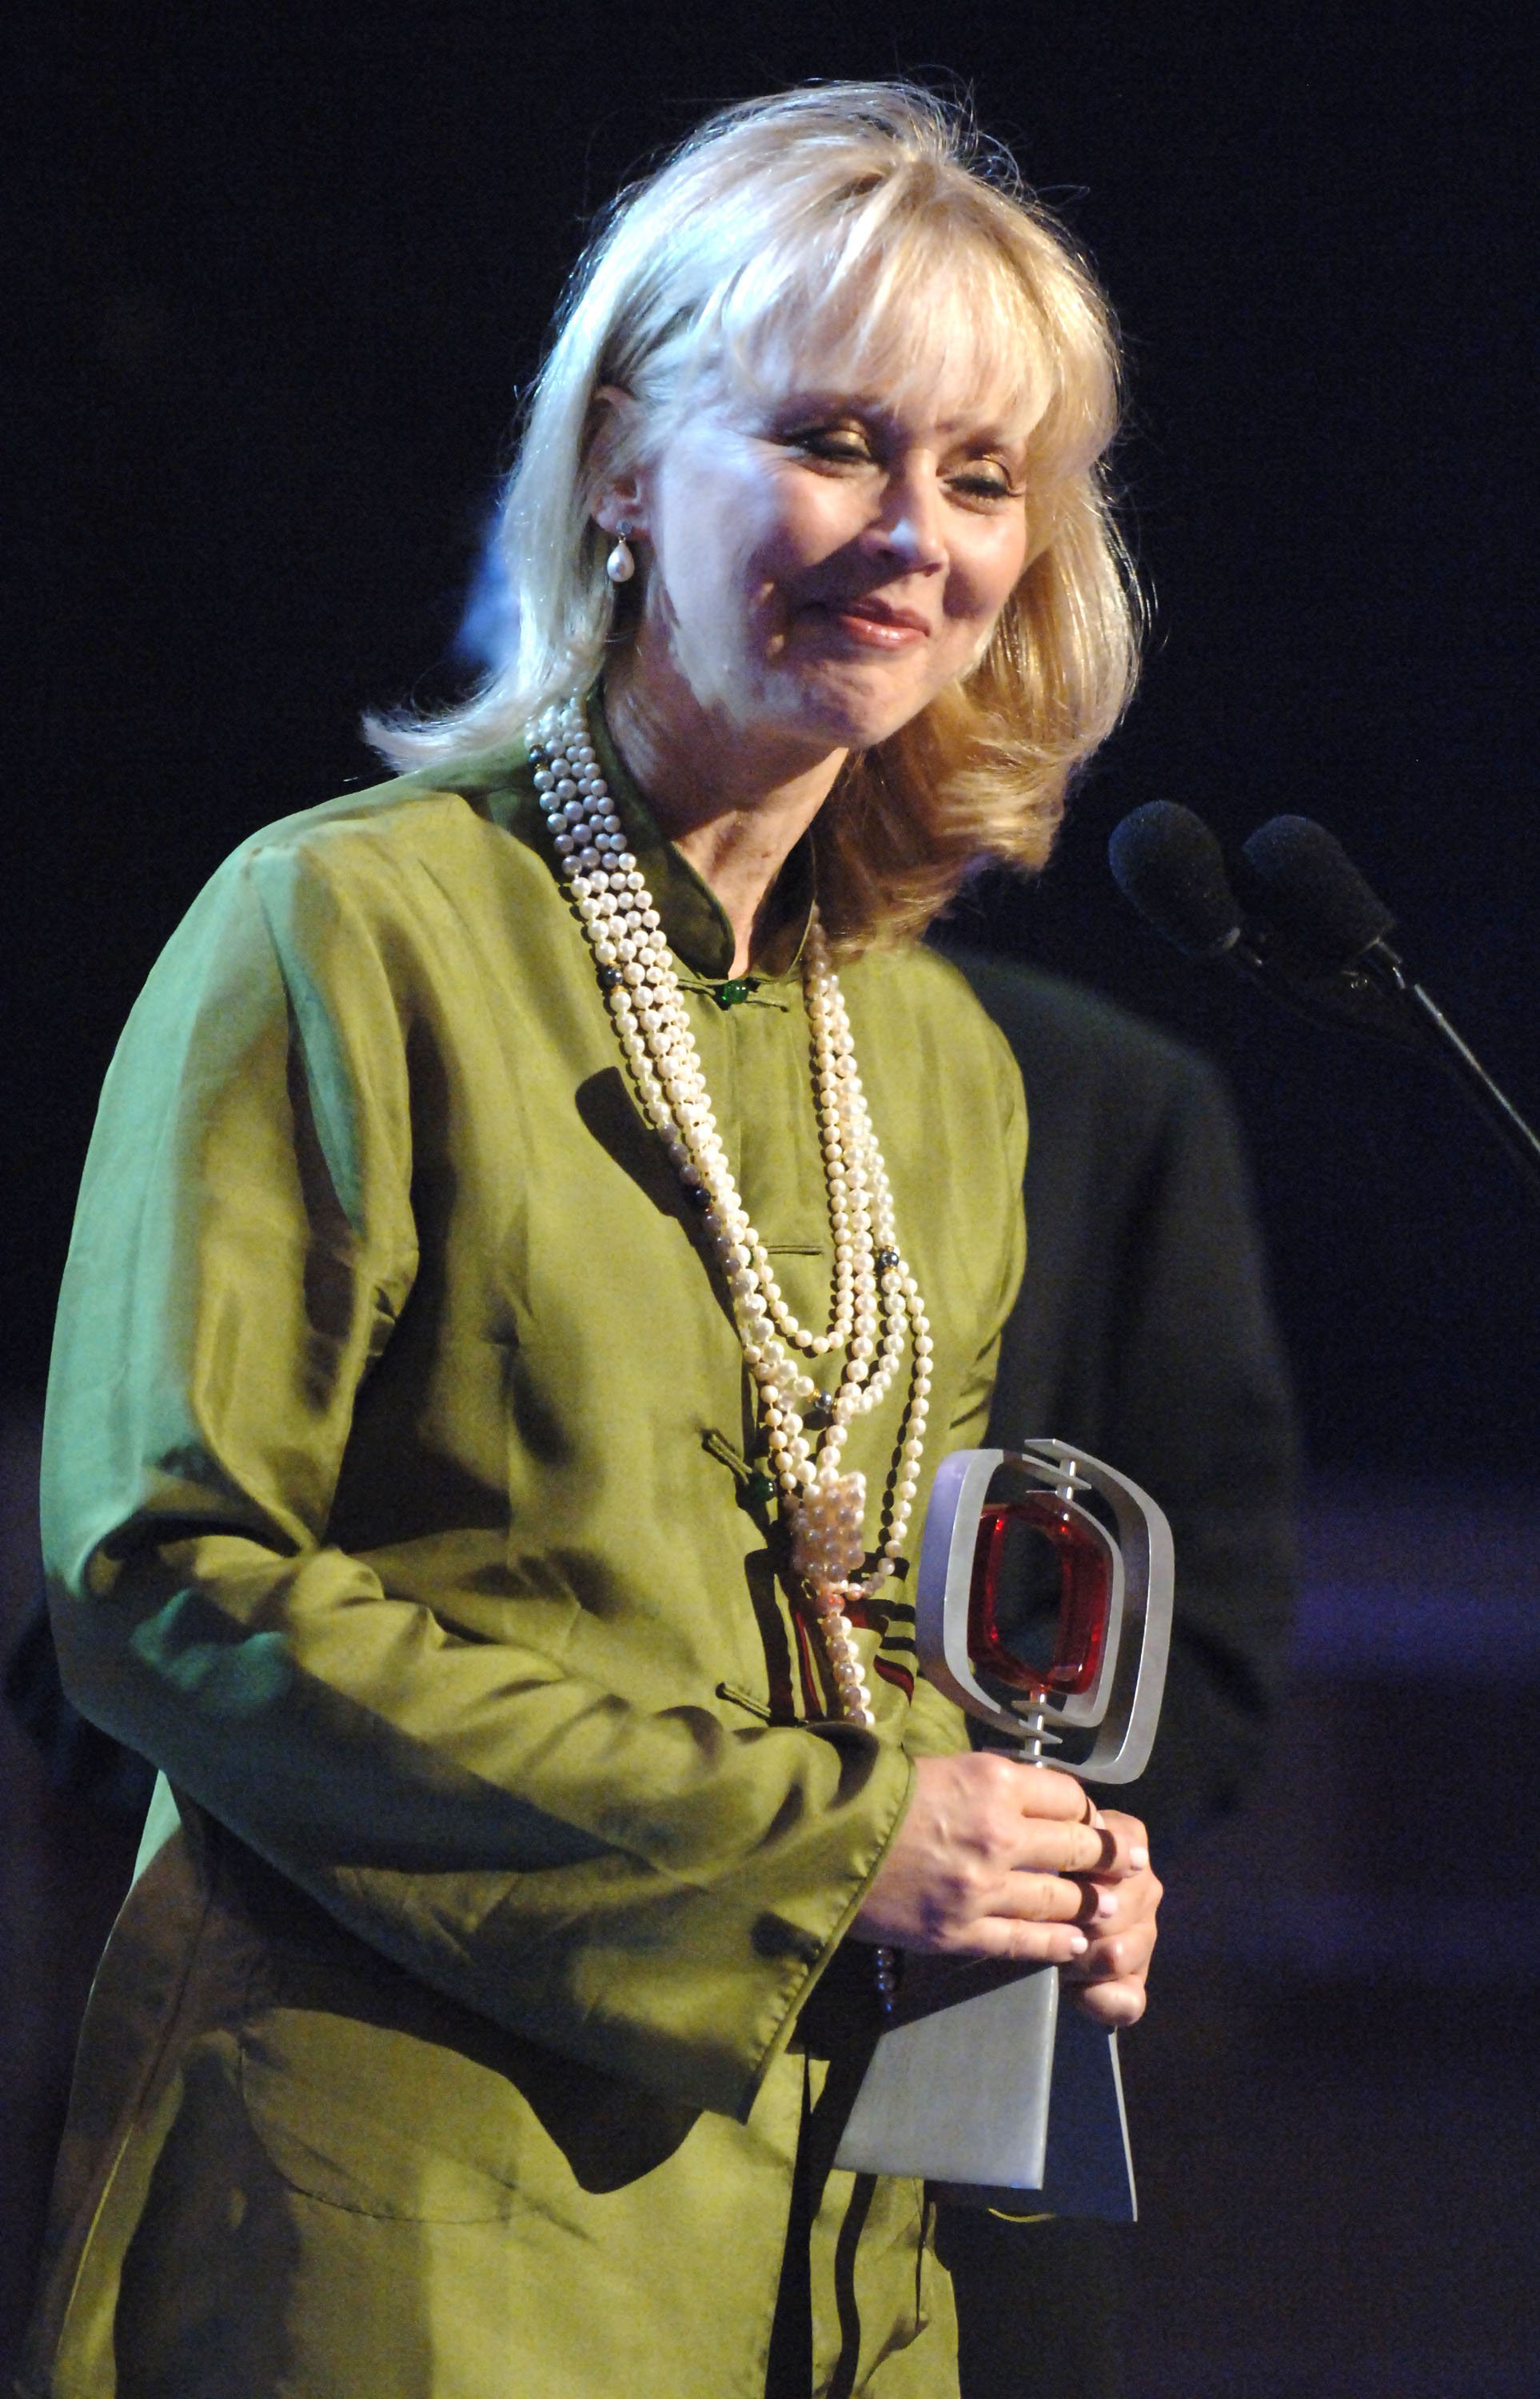 Shelley Long accepts Legend Award for Cheers during 2006 TV Land Awards, Santa Monica, California, United States. | Photo: Getty Images